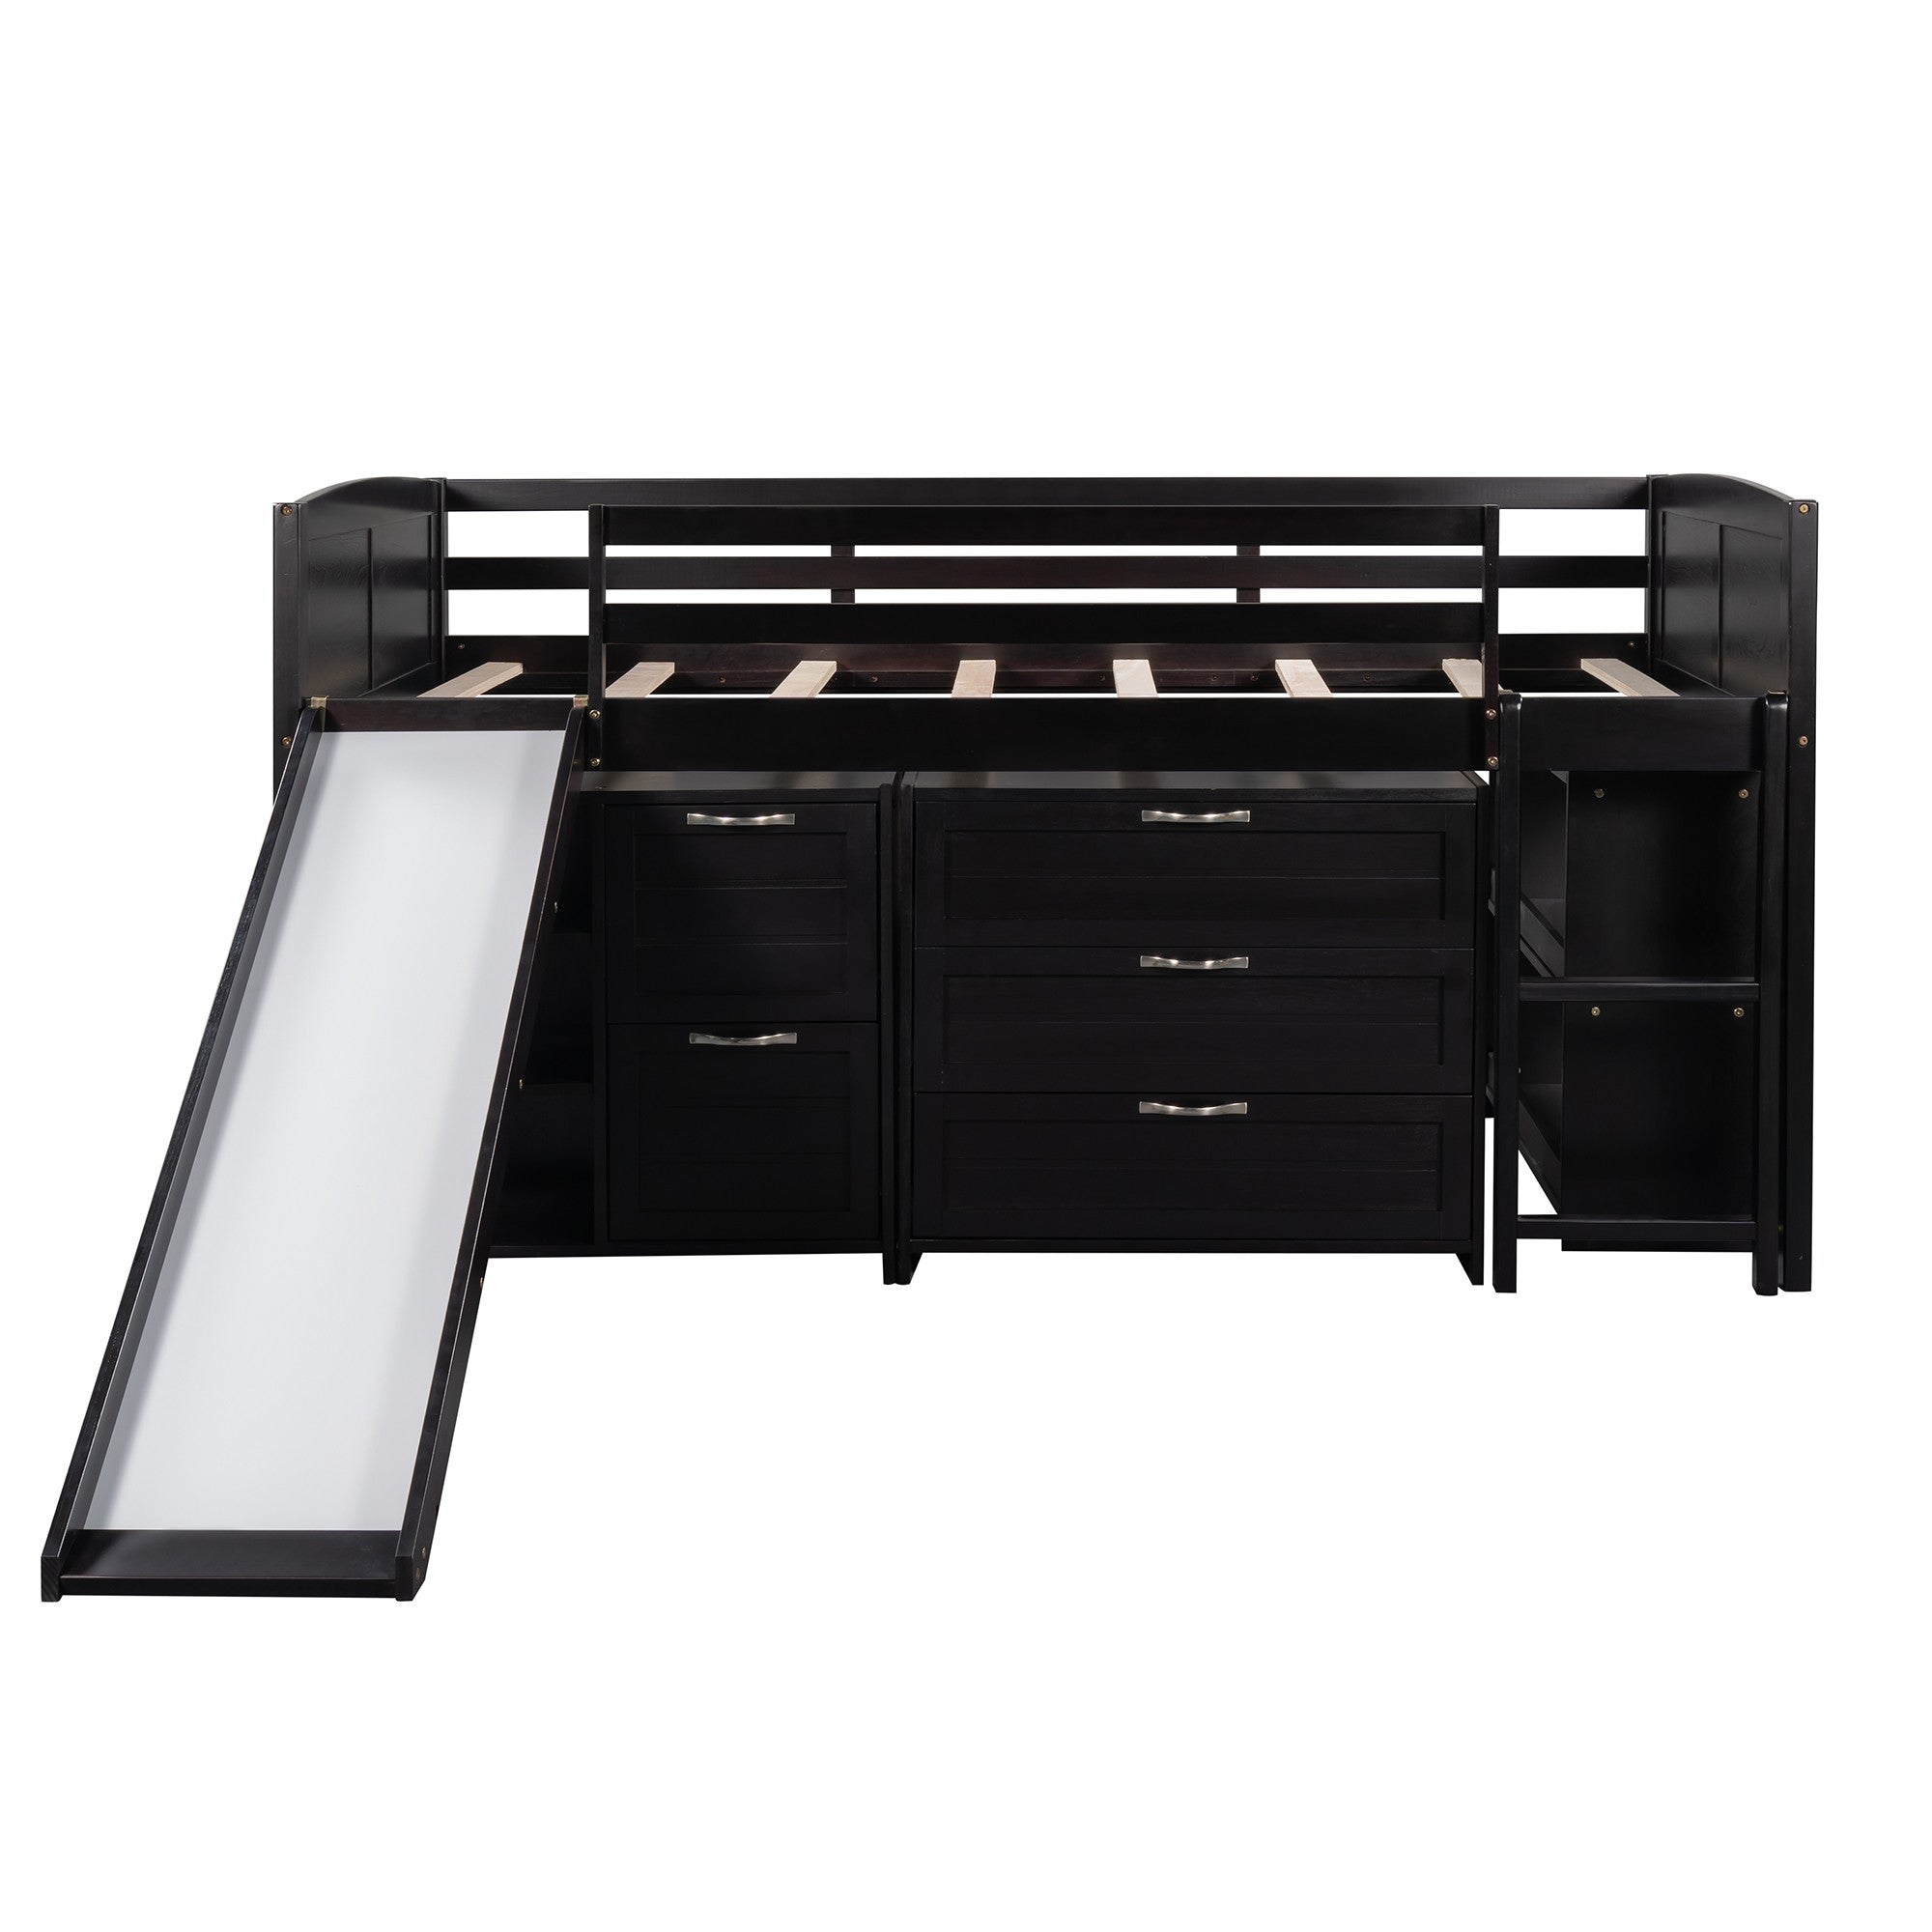 Brown Twin Size Low Loft Bed With Cabinets and Slide